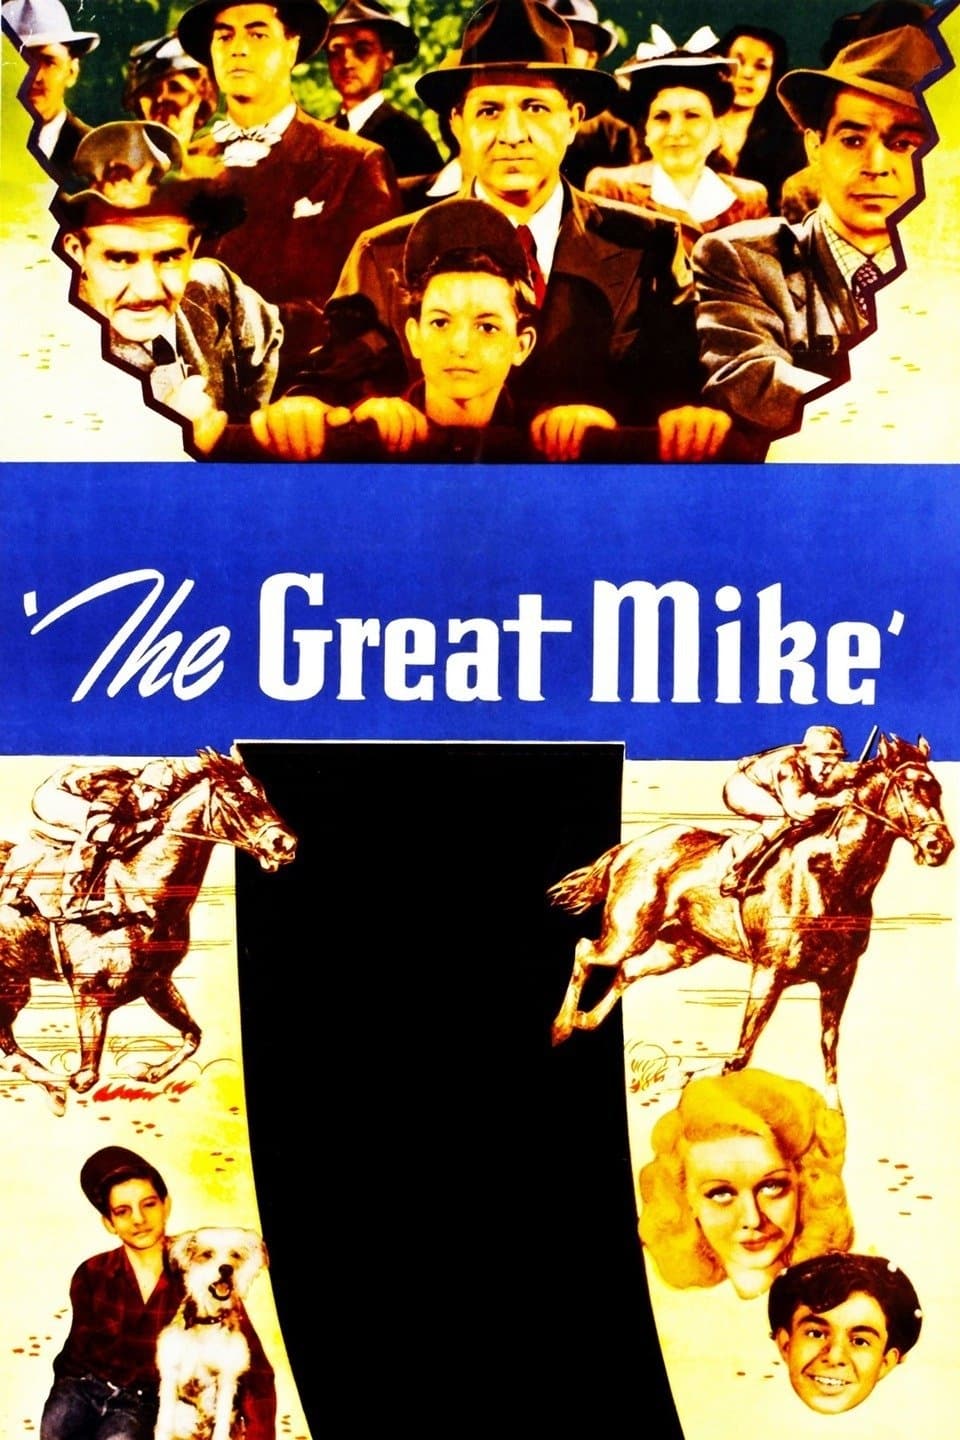 The Great Mike (1944)